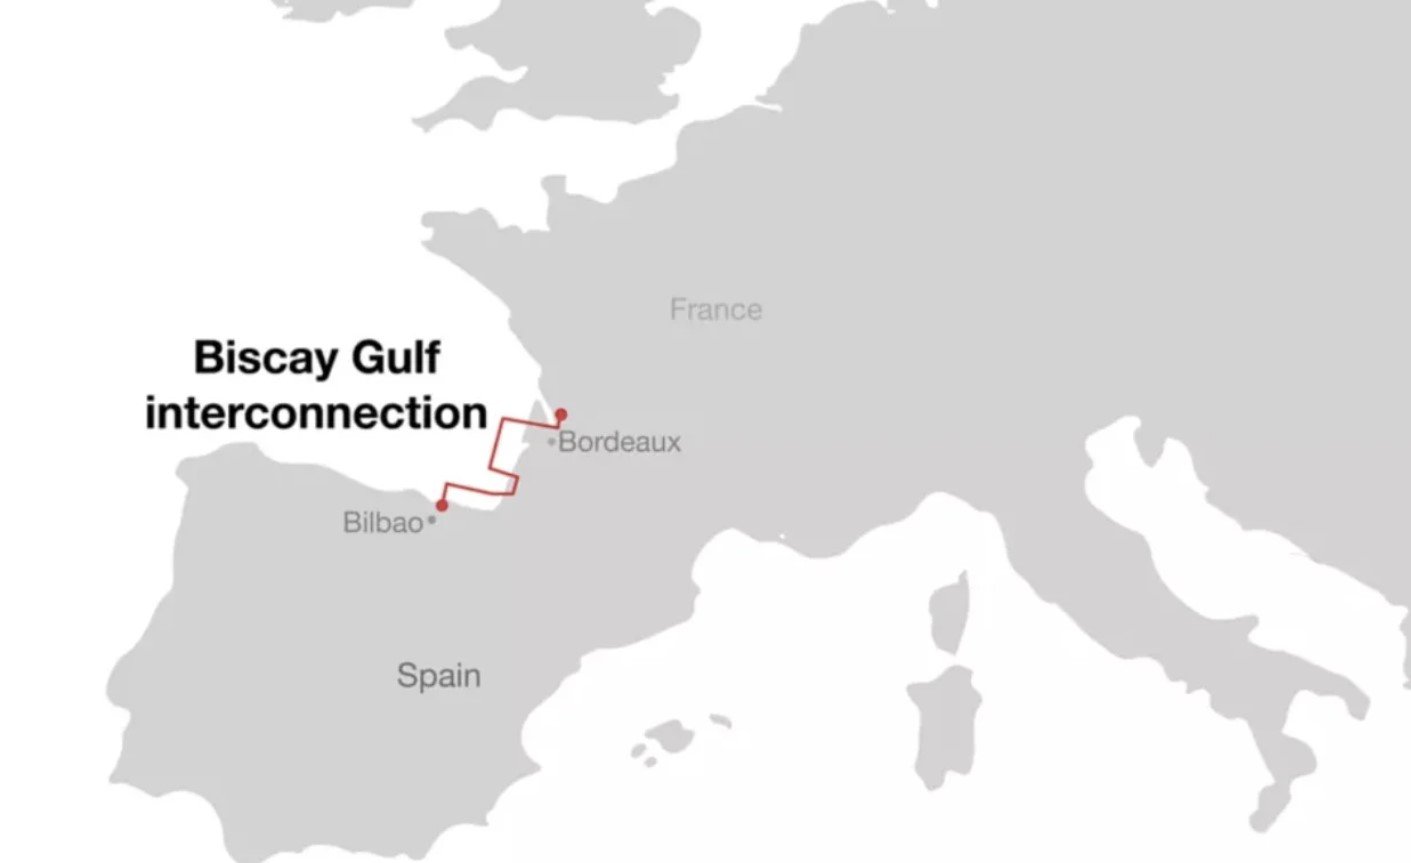 Construction begins on first subsea interconnector between Spain and France